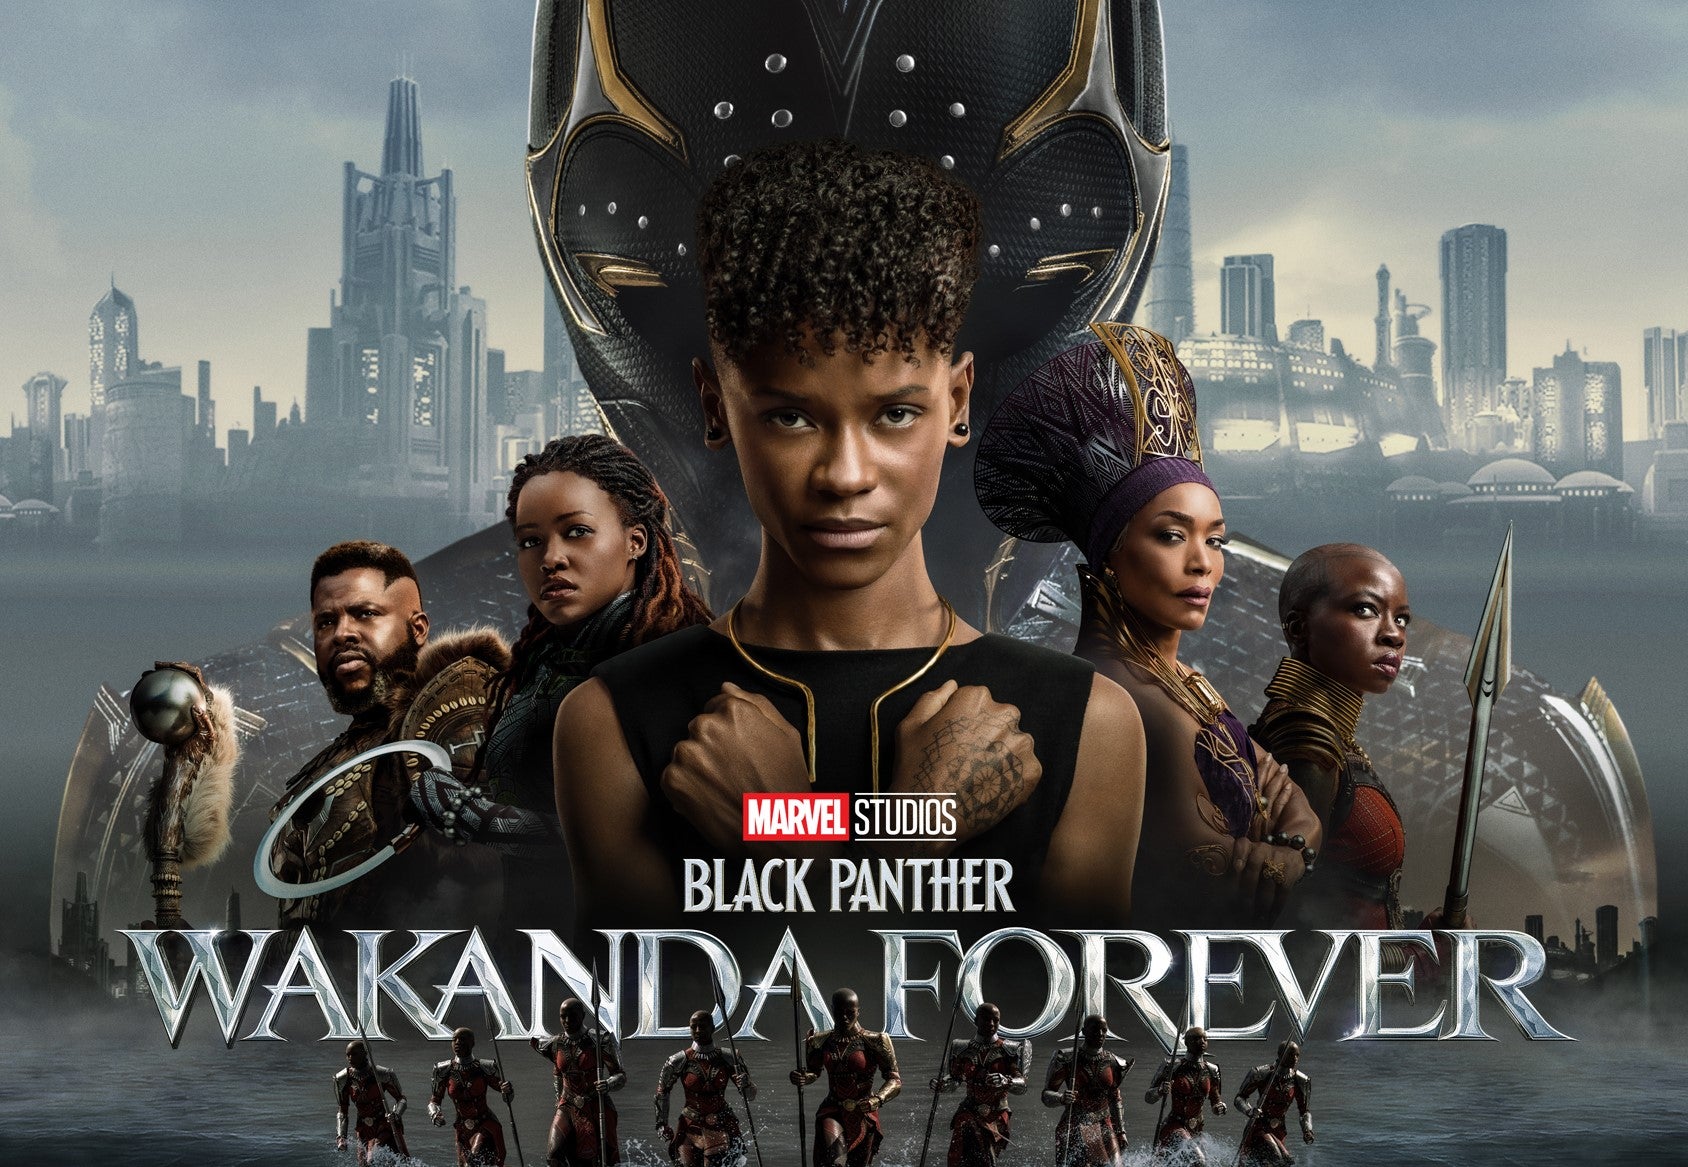 Cropped poster for Black Panther Wakanda Forever featuring the cast of Black Panther